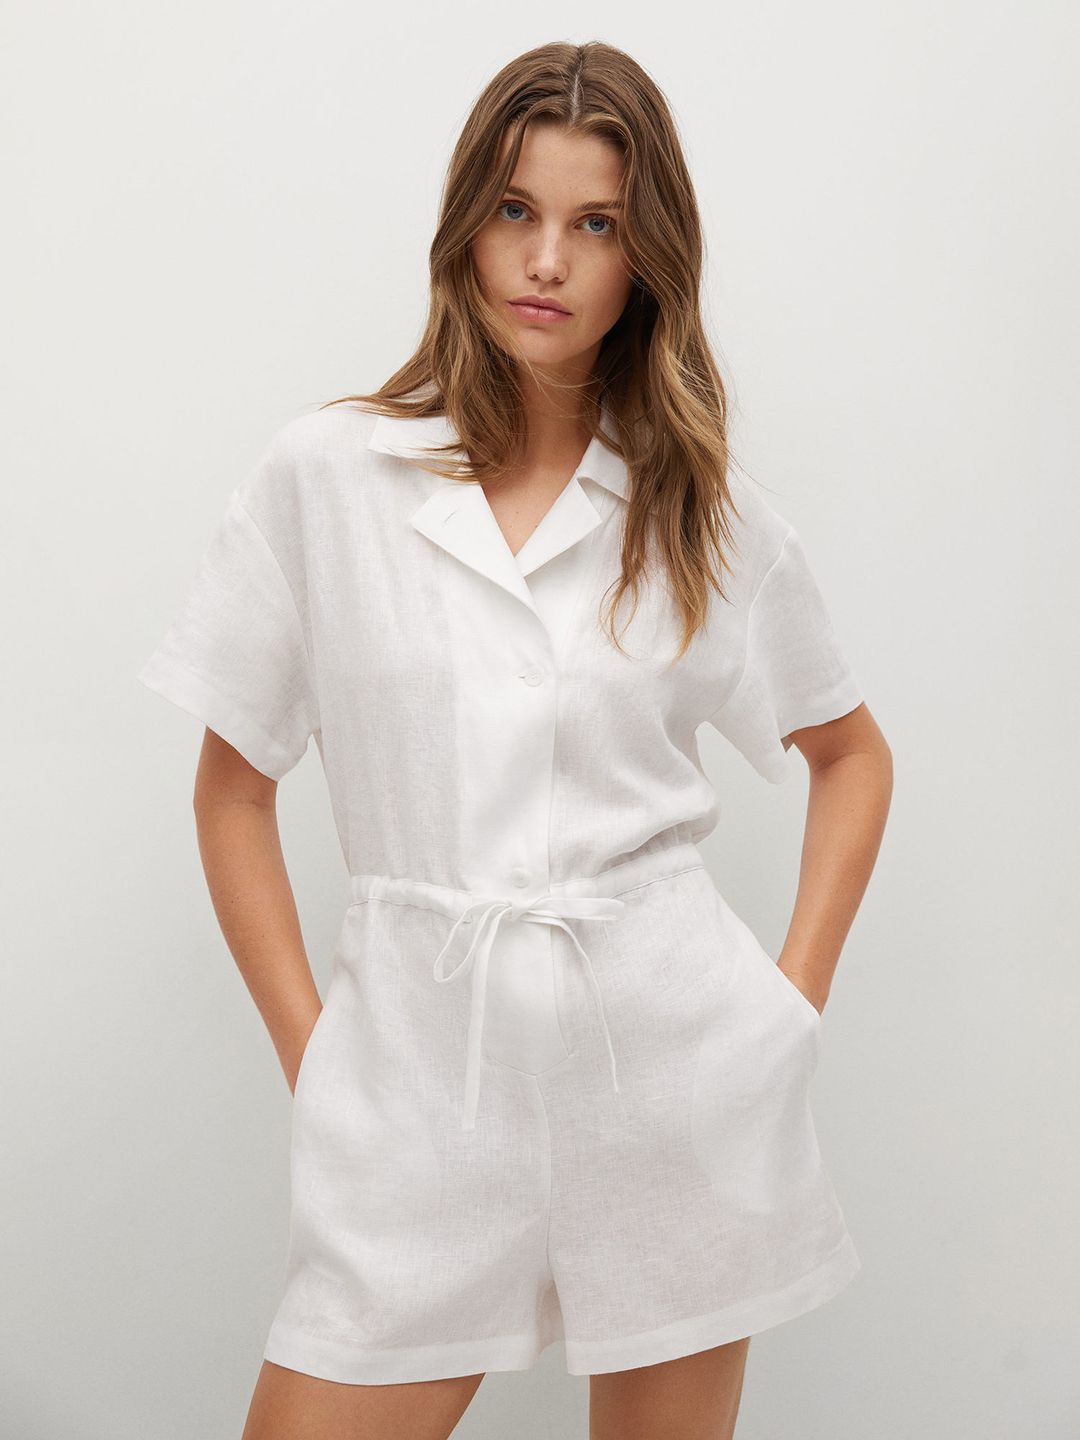 MANGO White Linen Playsuit with Waist Tie-Ups Price in India